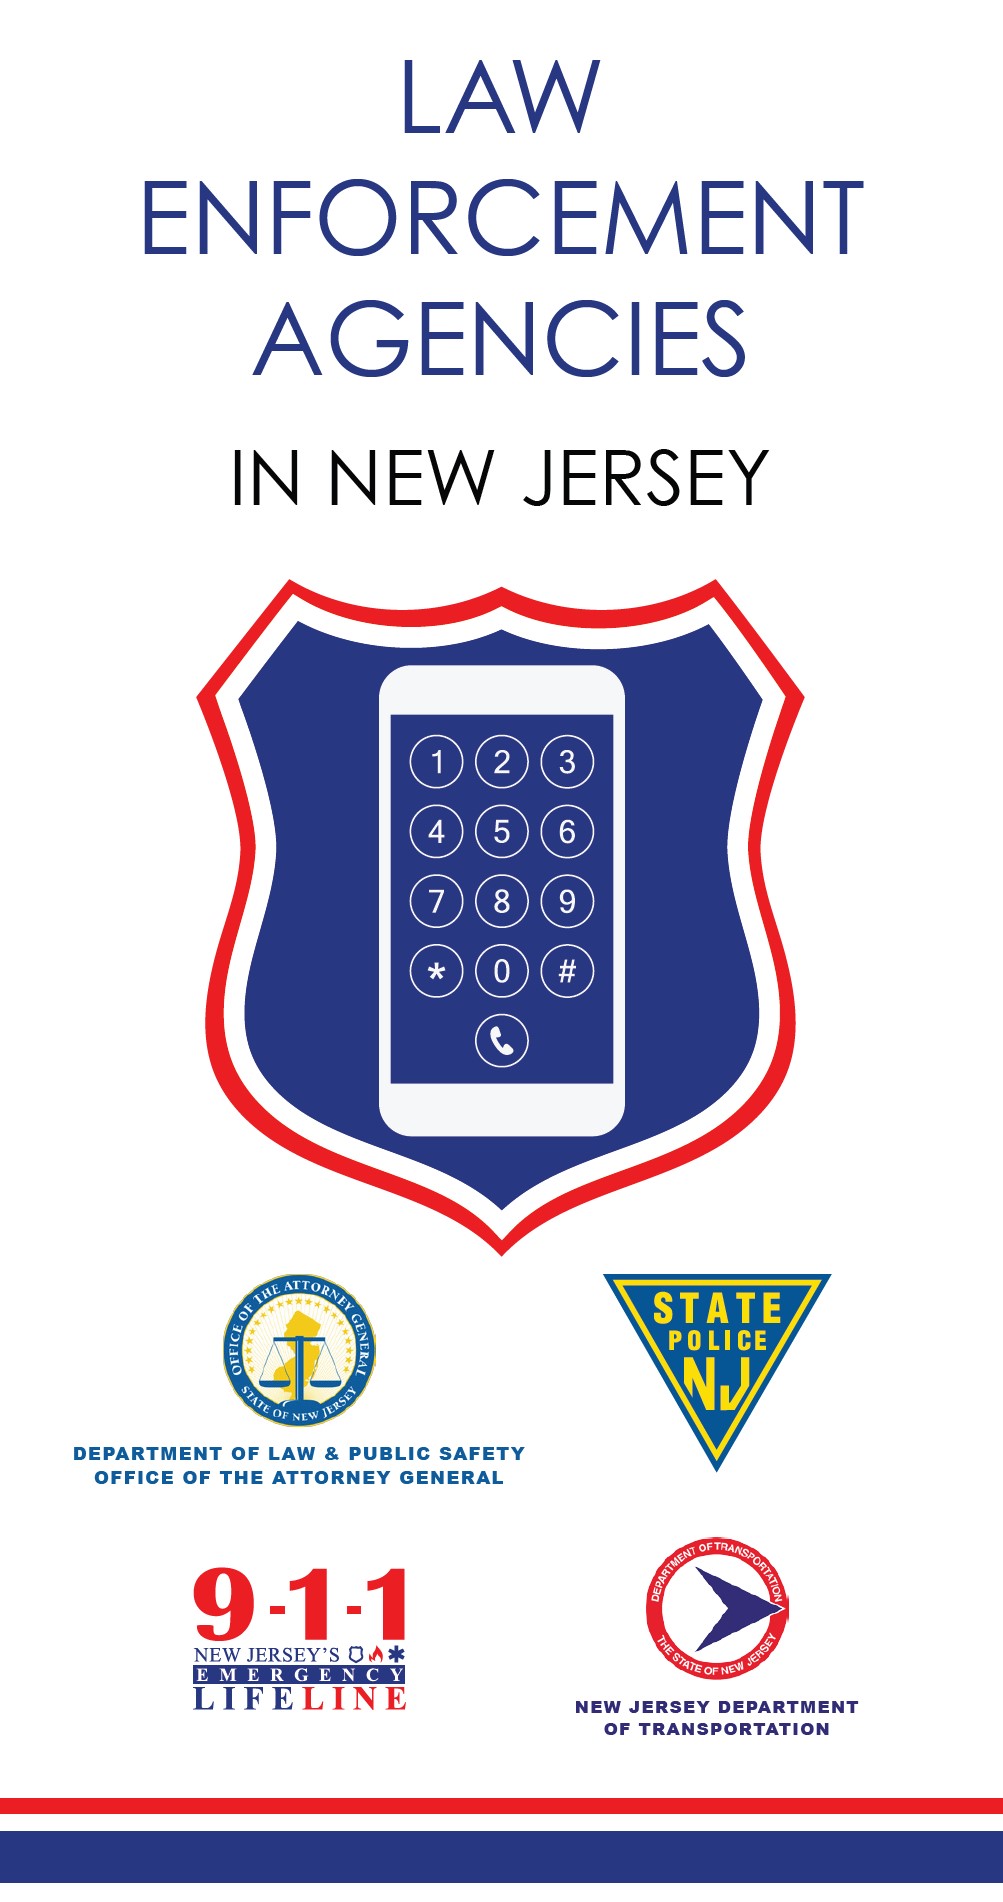 Nj department of law and public safety jobs